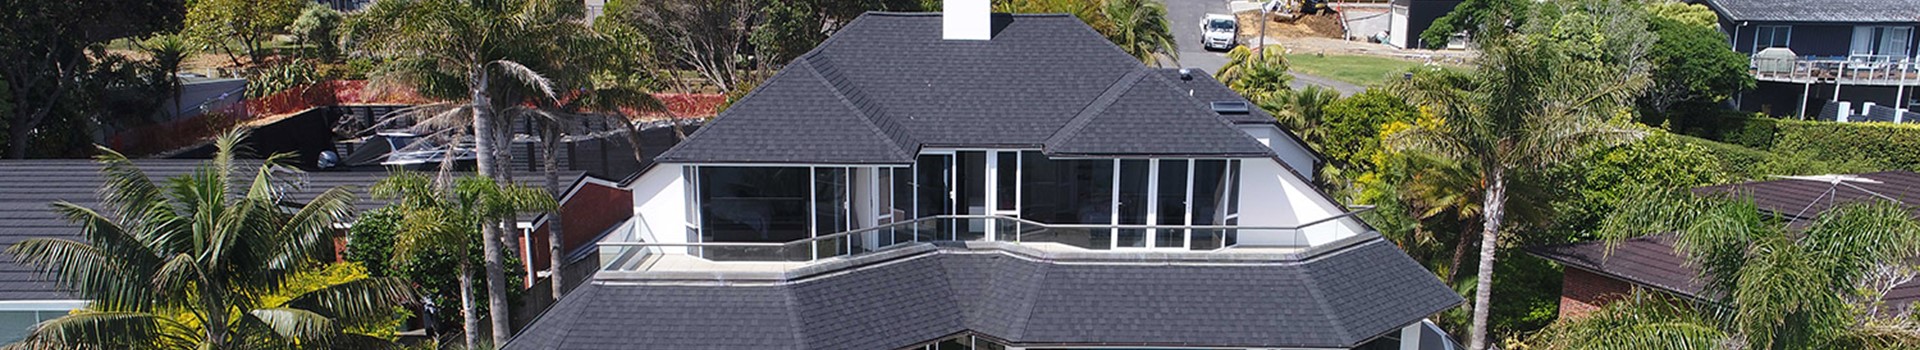 A Re-Roof Made Exceptionally Easy